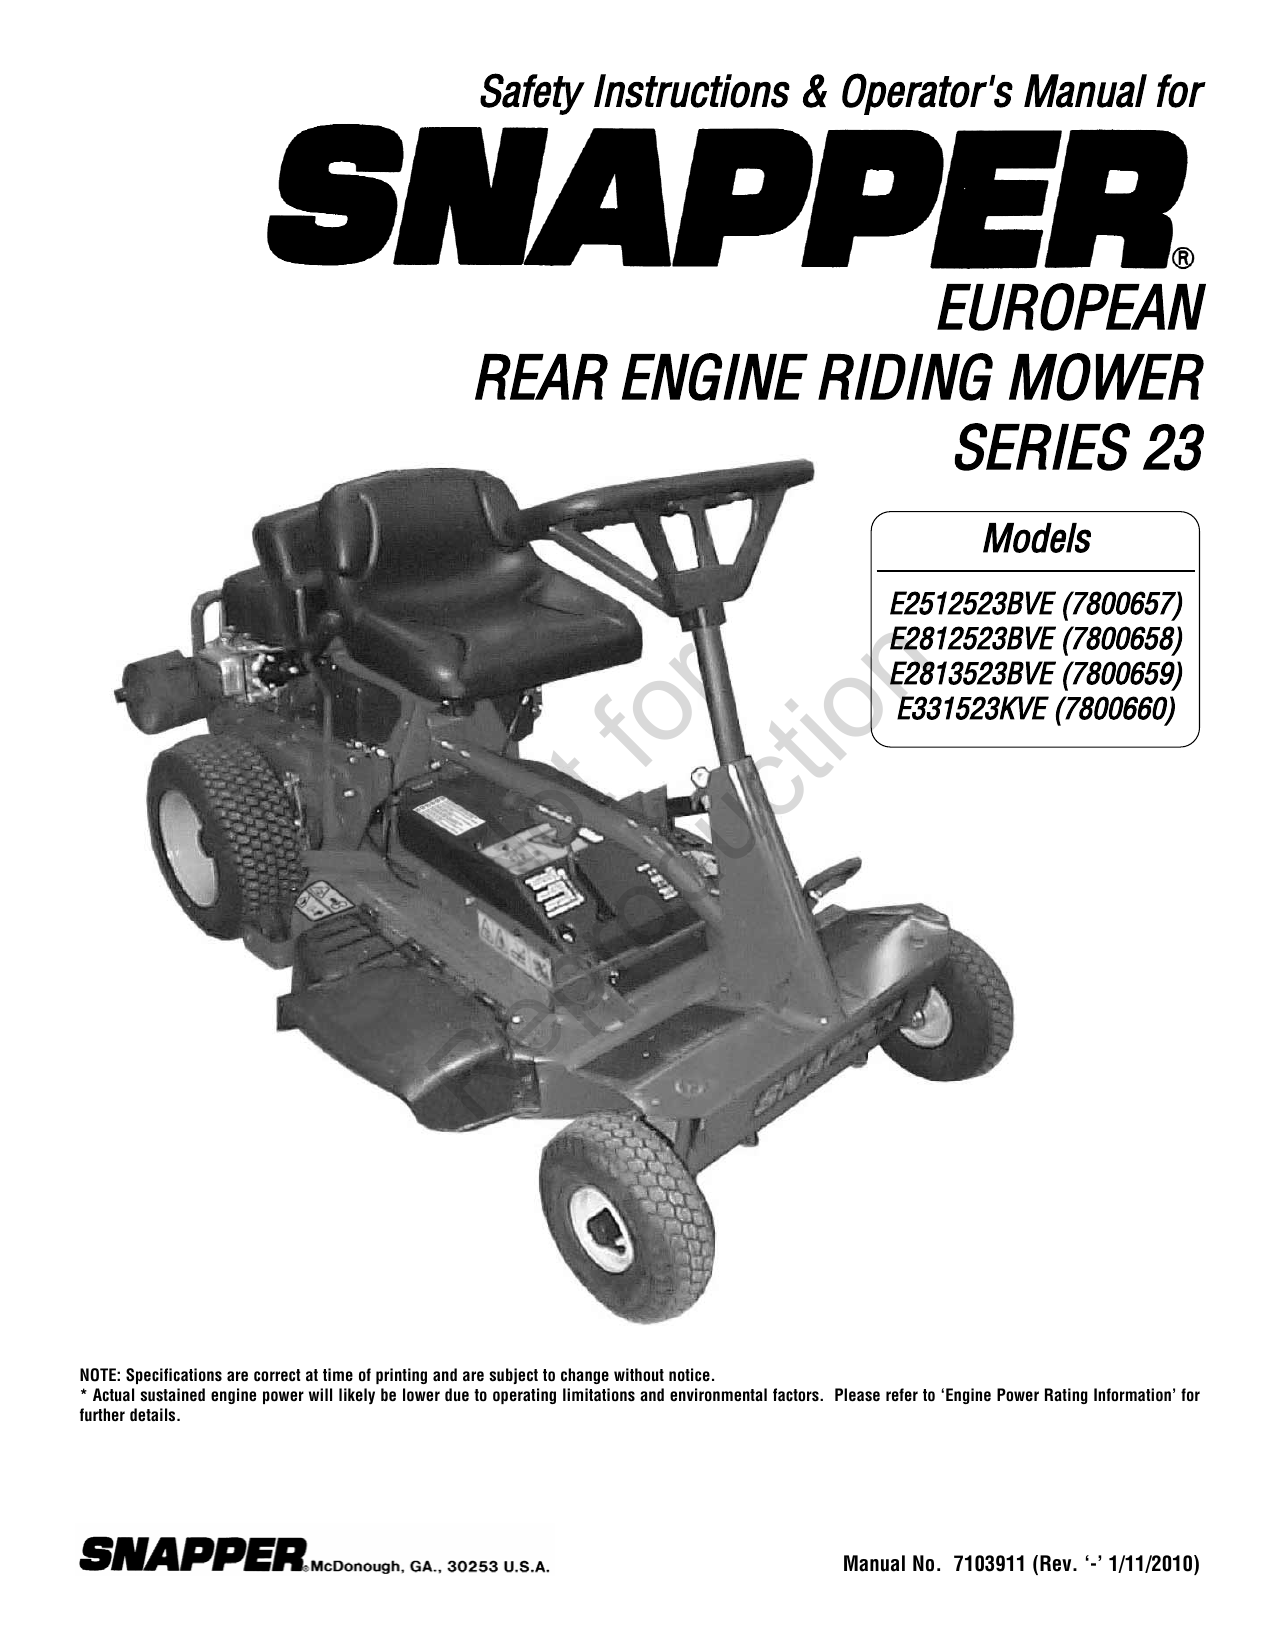 SAFETY INSTRUCTIONS & OPERATOR'S MANUAL FOR SNAPPER EUROPEAN REAR ENGINE RIDING MOWER SERIES 23